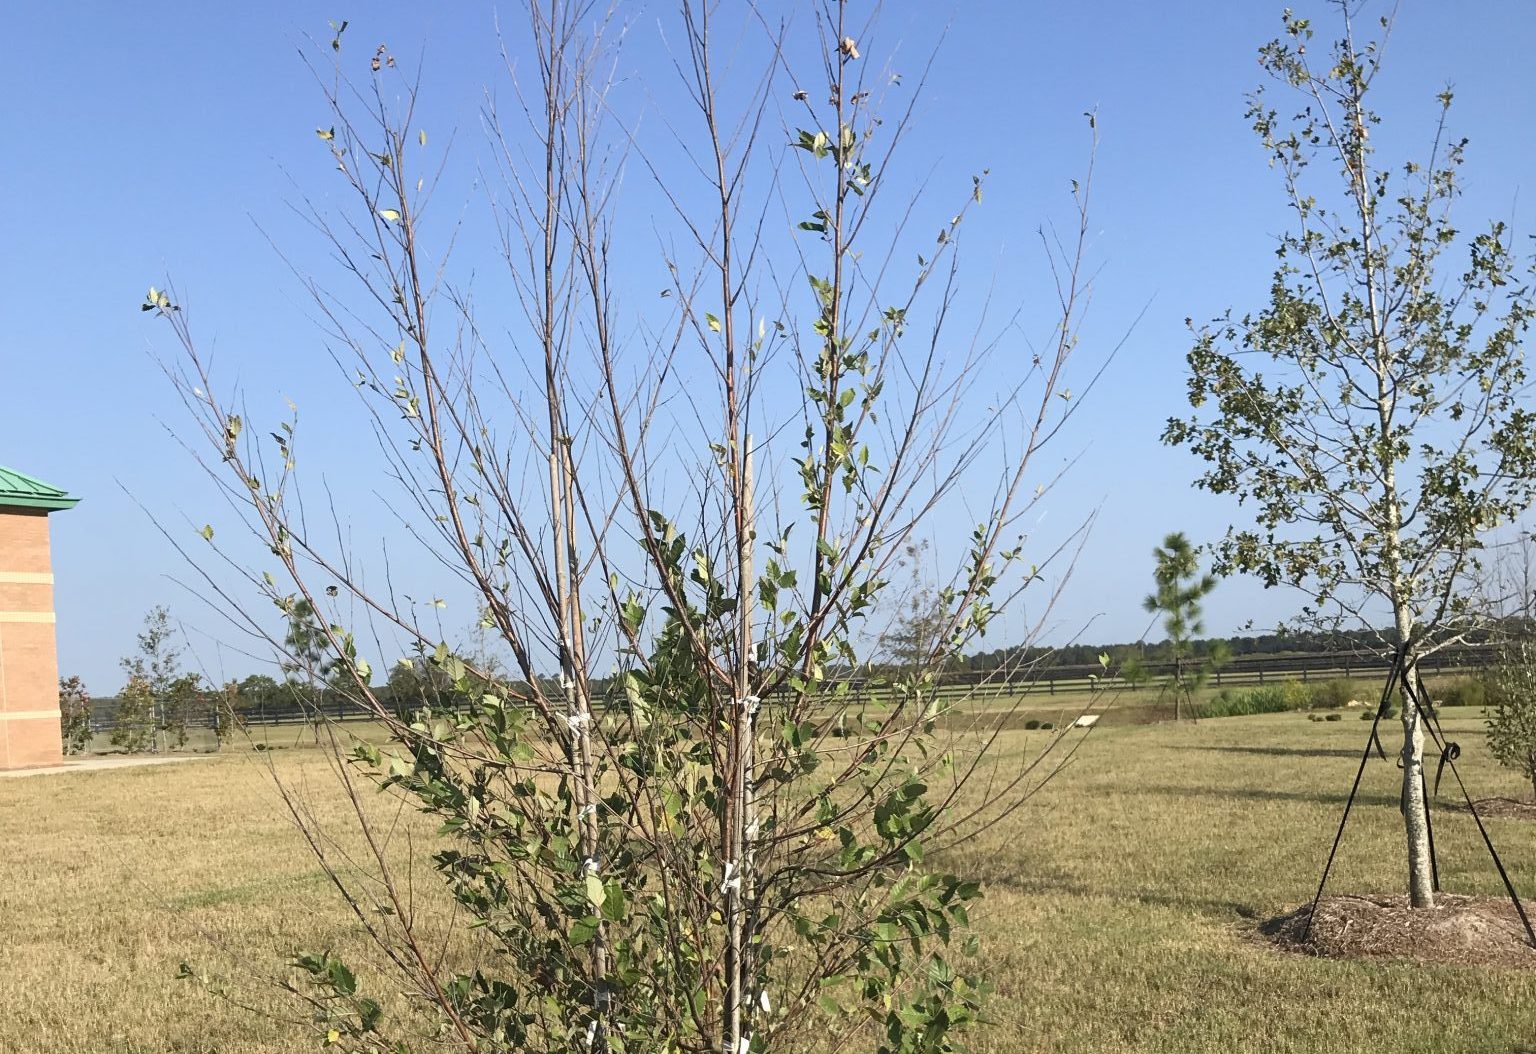 Tree defoliating from the top and branch extremities